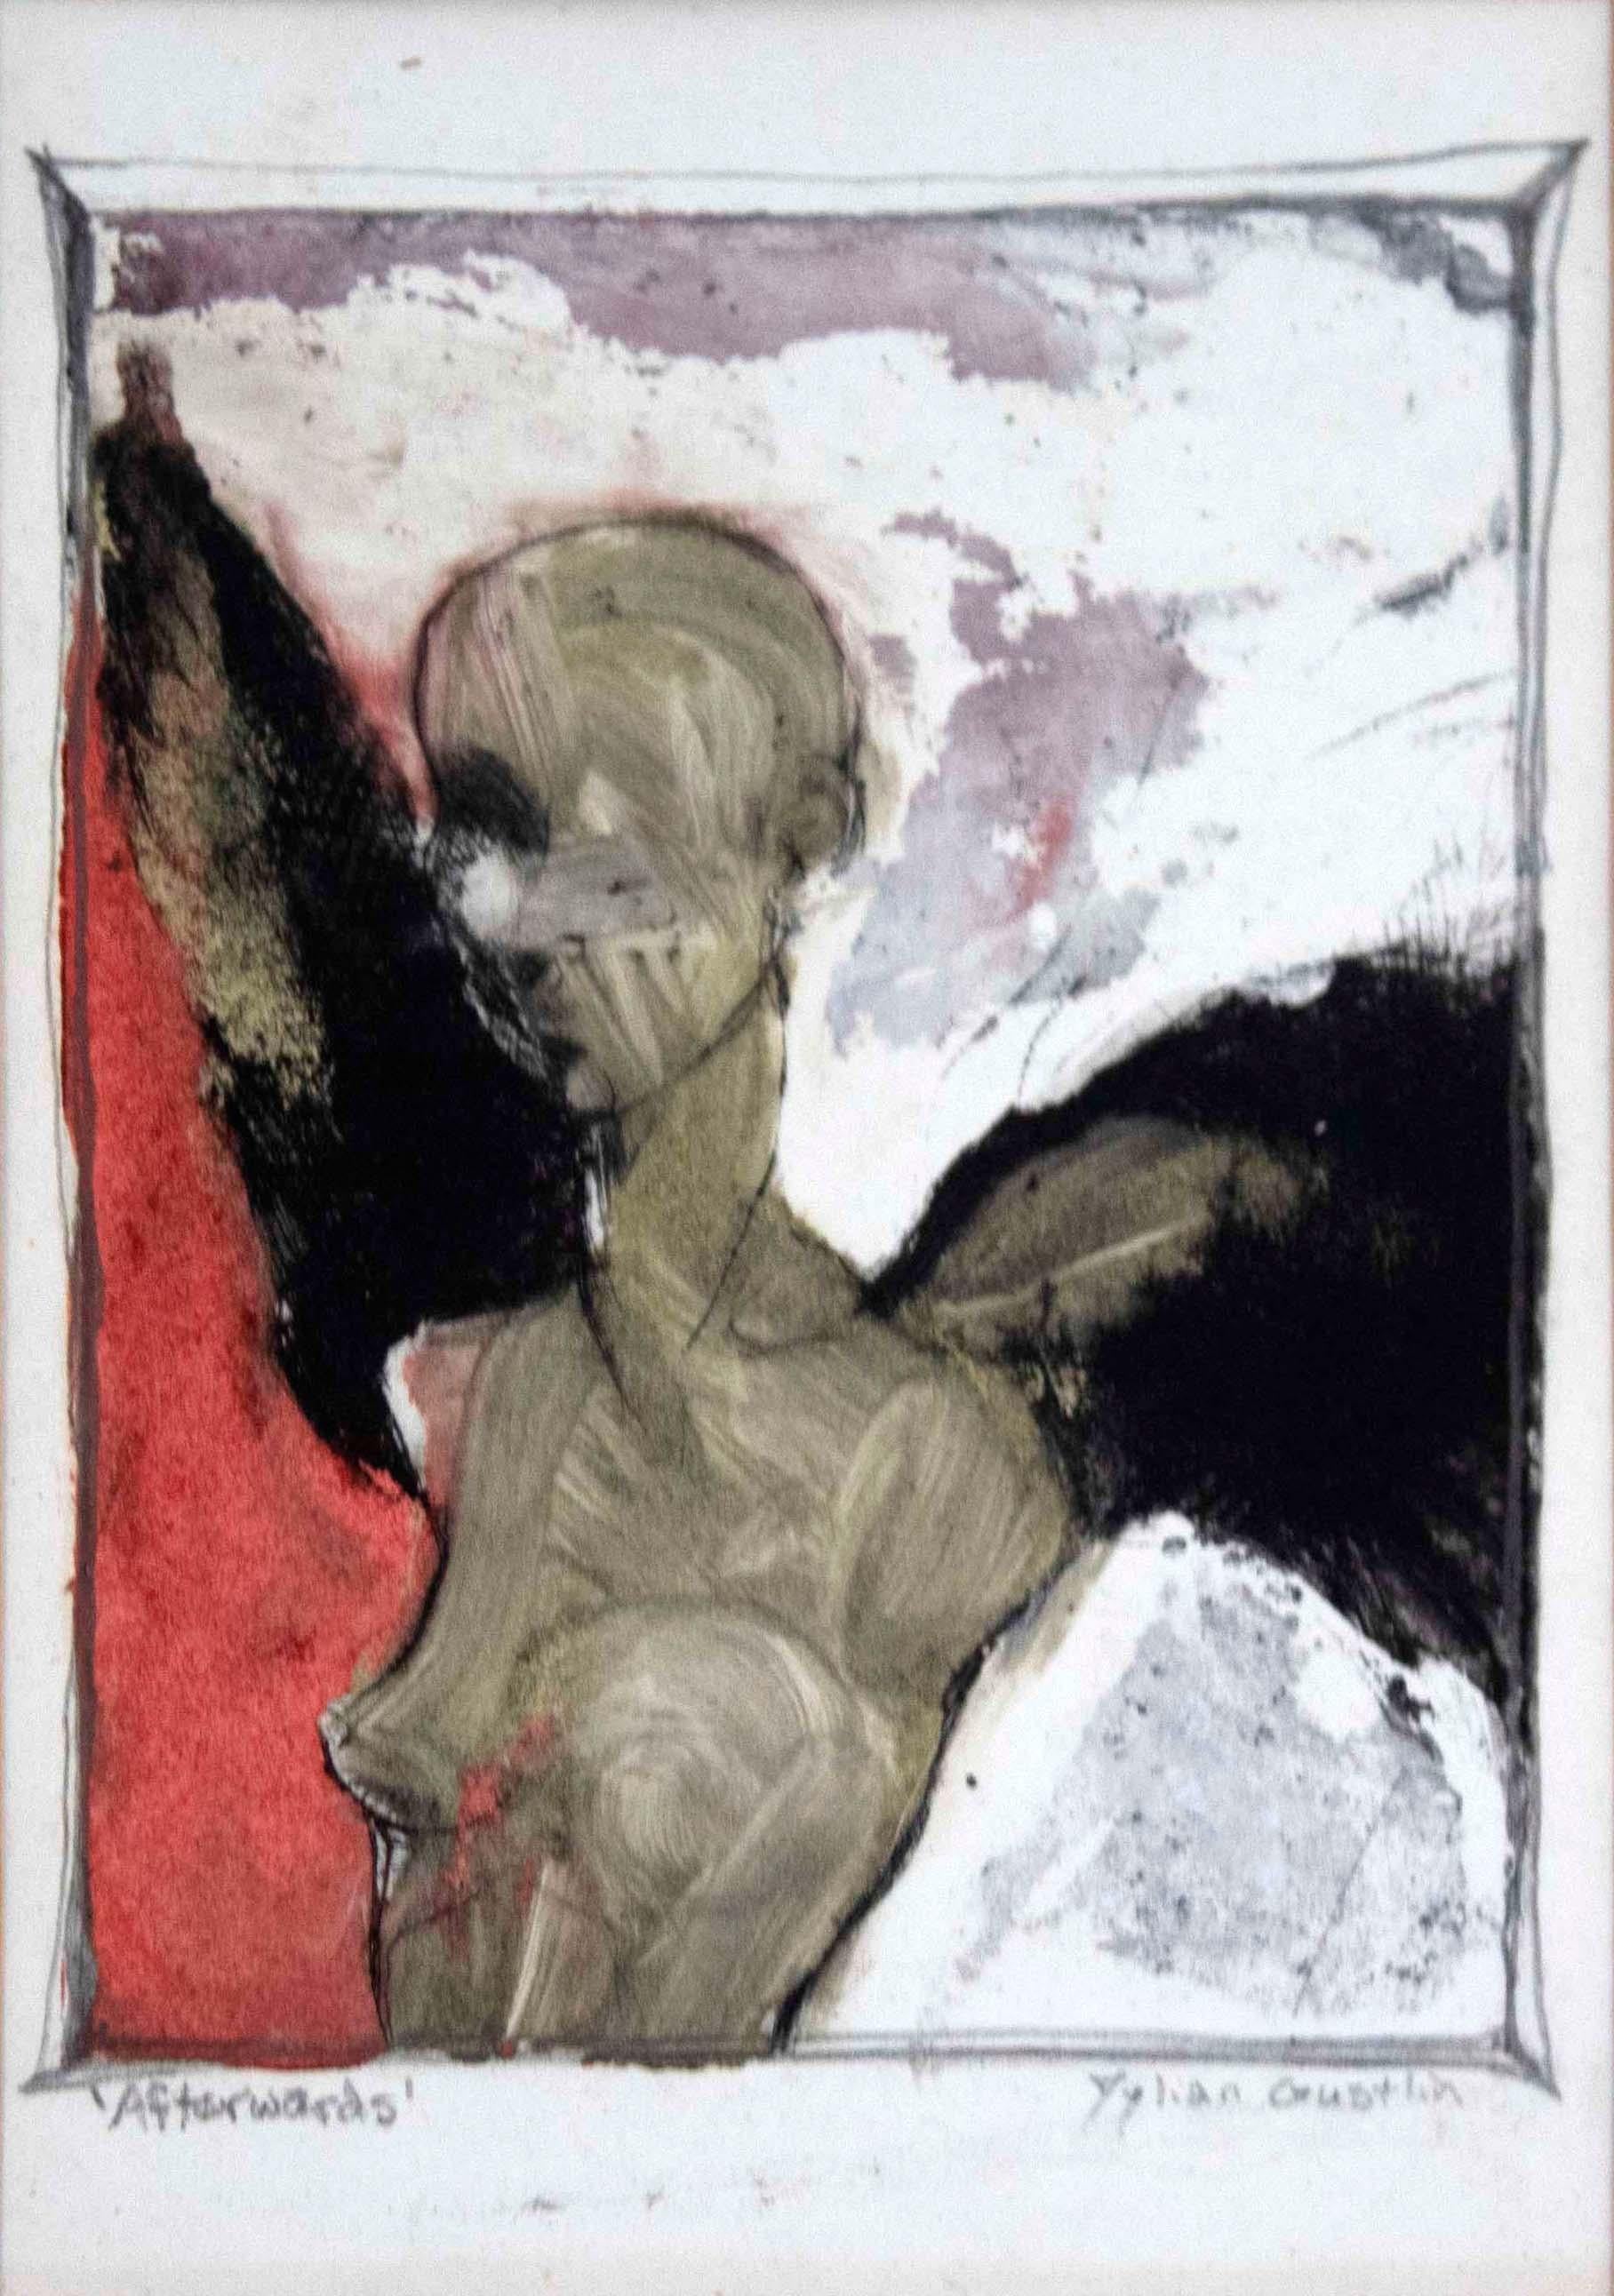 For your consideration is a captivating mixed media drawing of an angel with wings titled Afterwards in the bottom left corner and hand signed in right corner by Jylian Gustlin. 


This drawing was acquired from a curator and gallery owner from